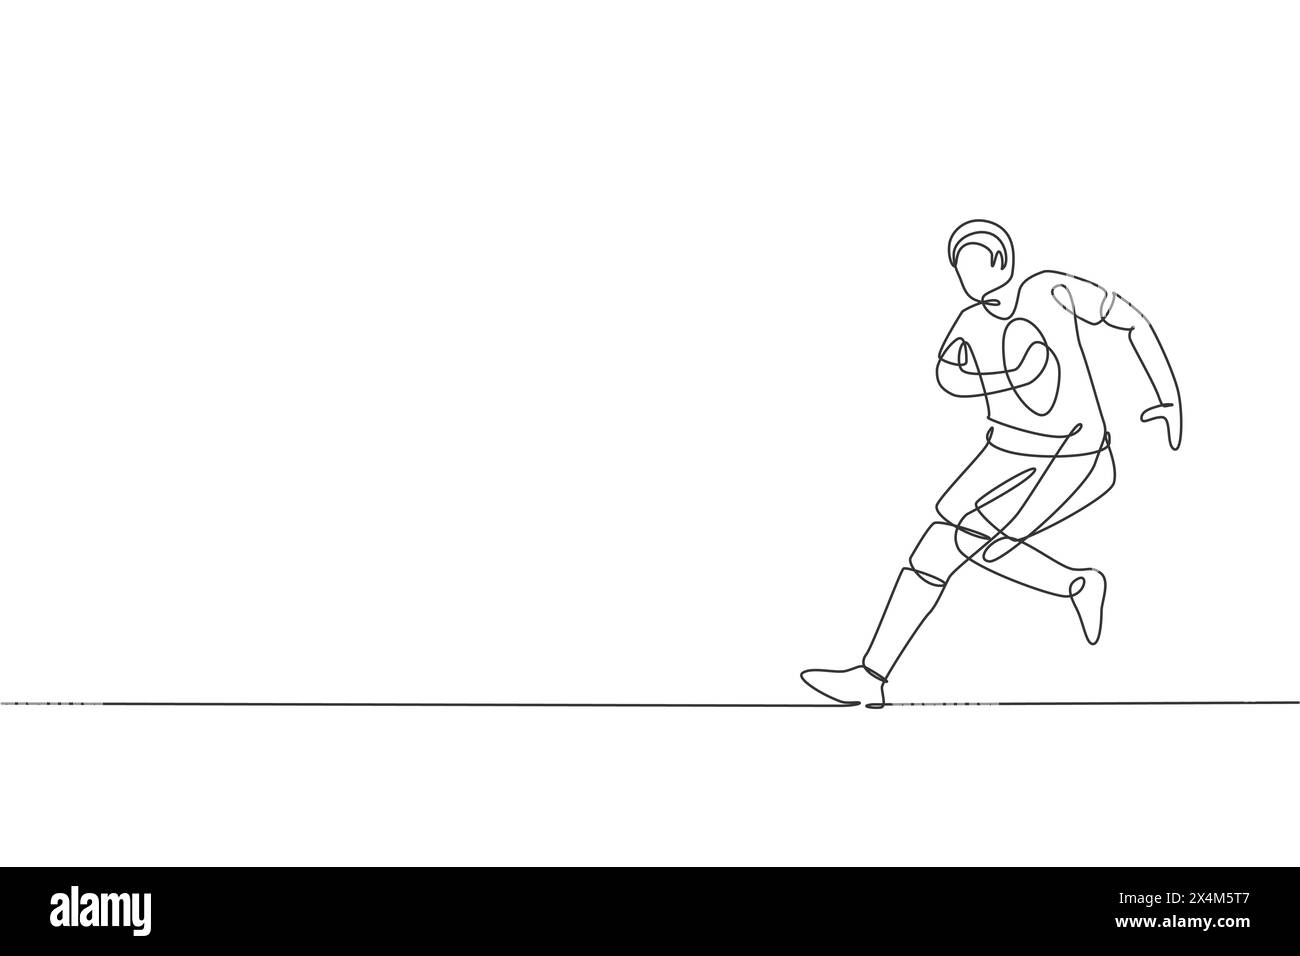 One single line drawing of young energetic rugby player training and practicing at field vector illustration. Full body contact sport concept. Modern Stock Vector